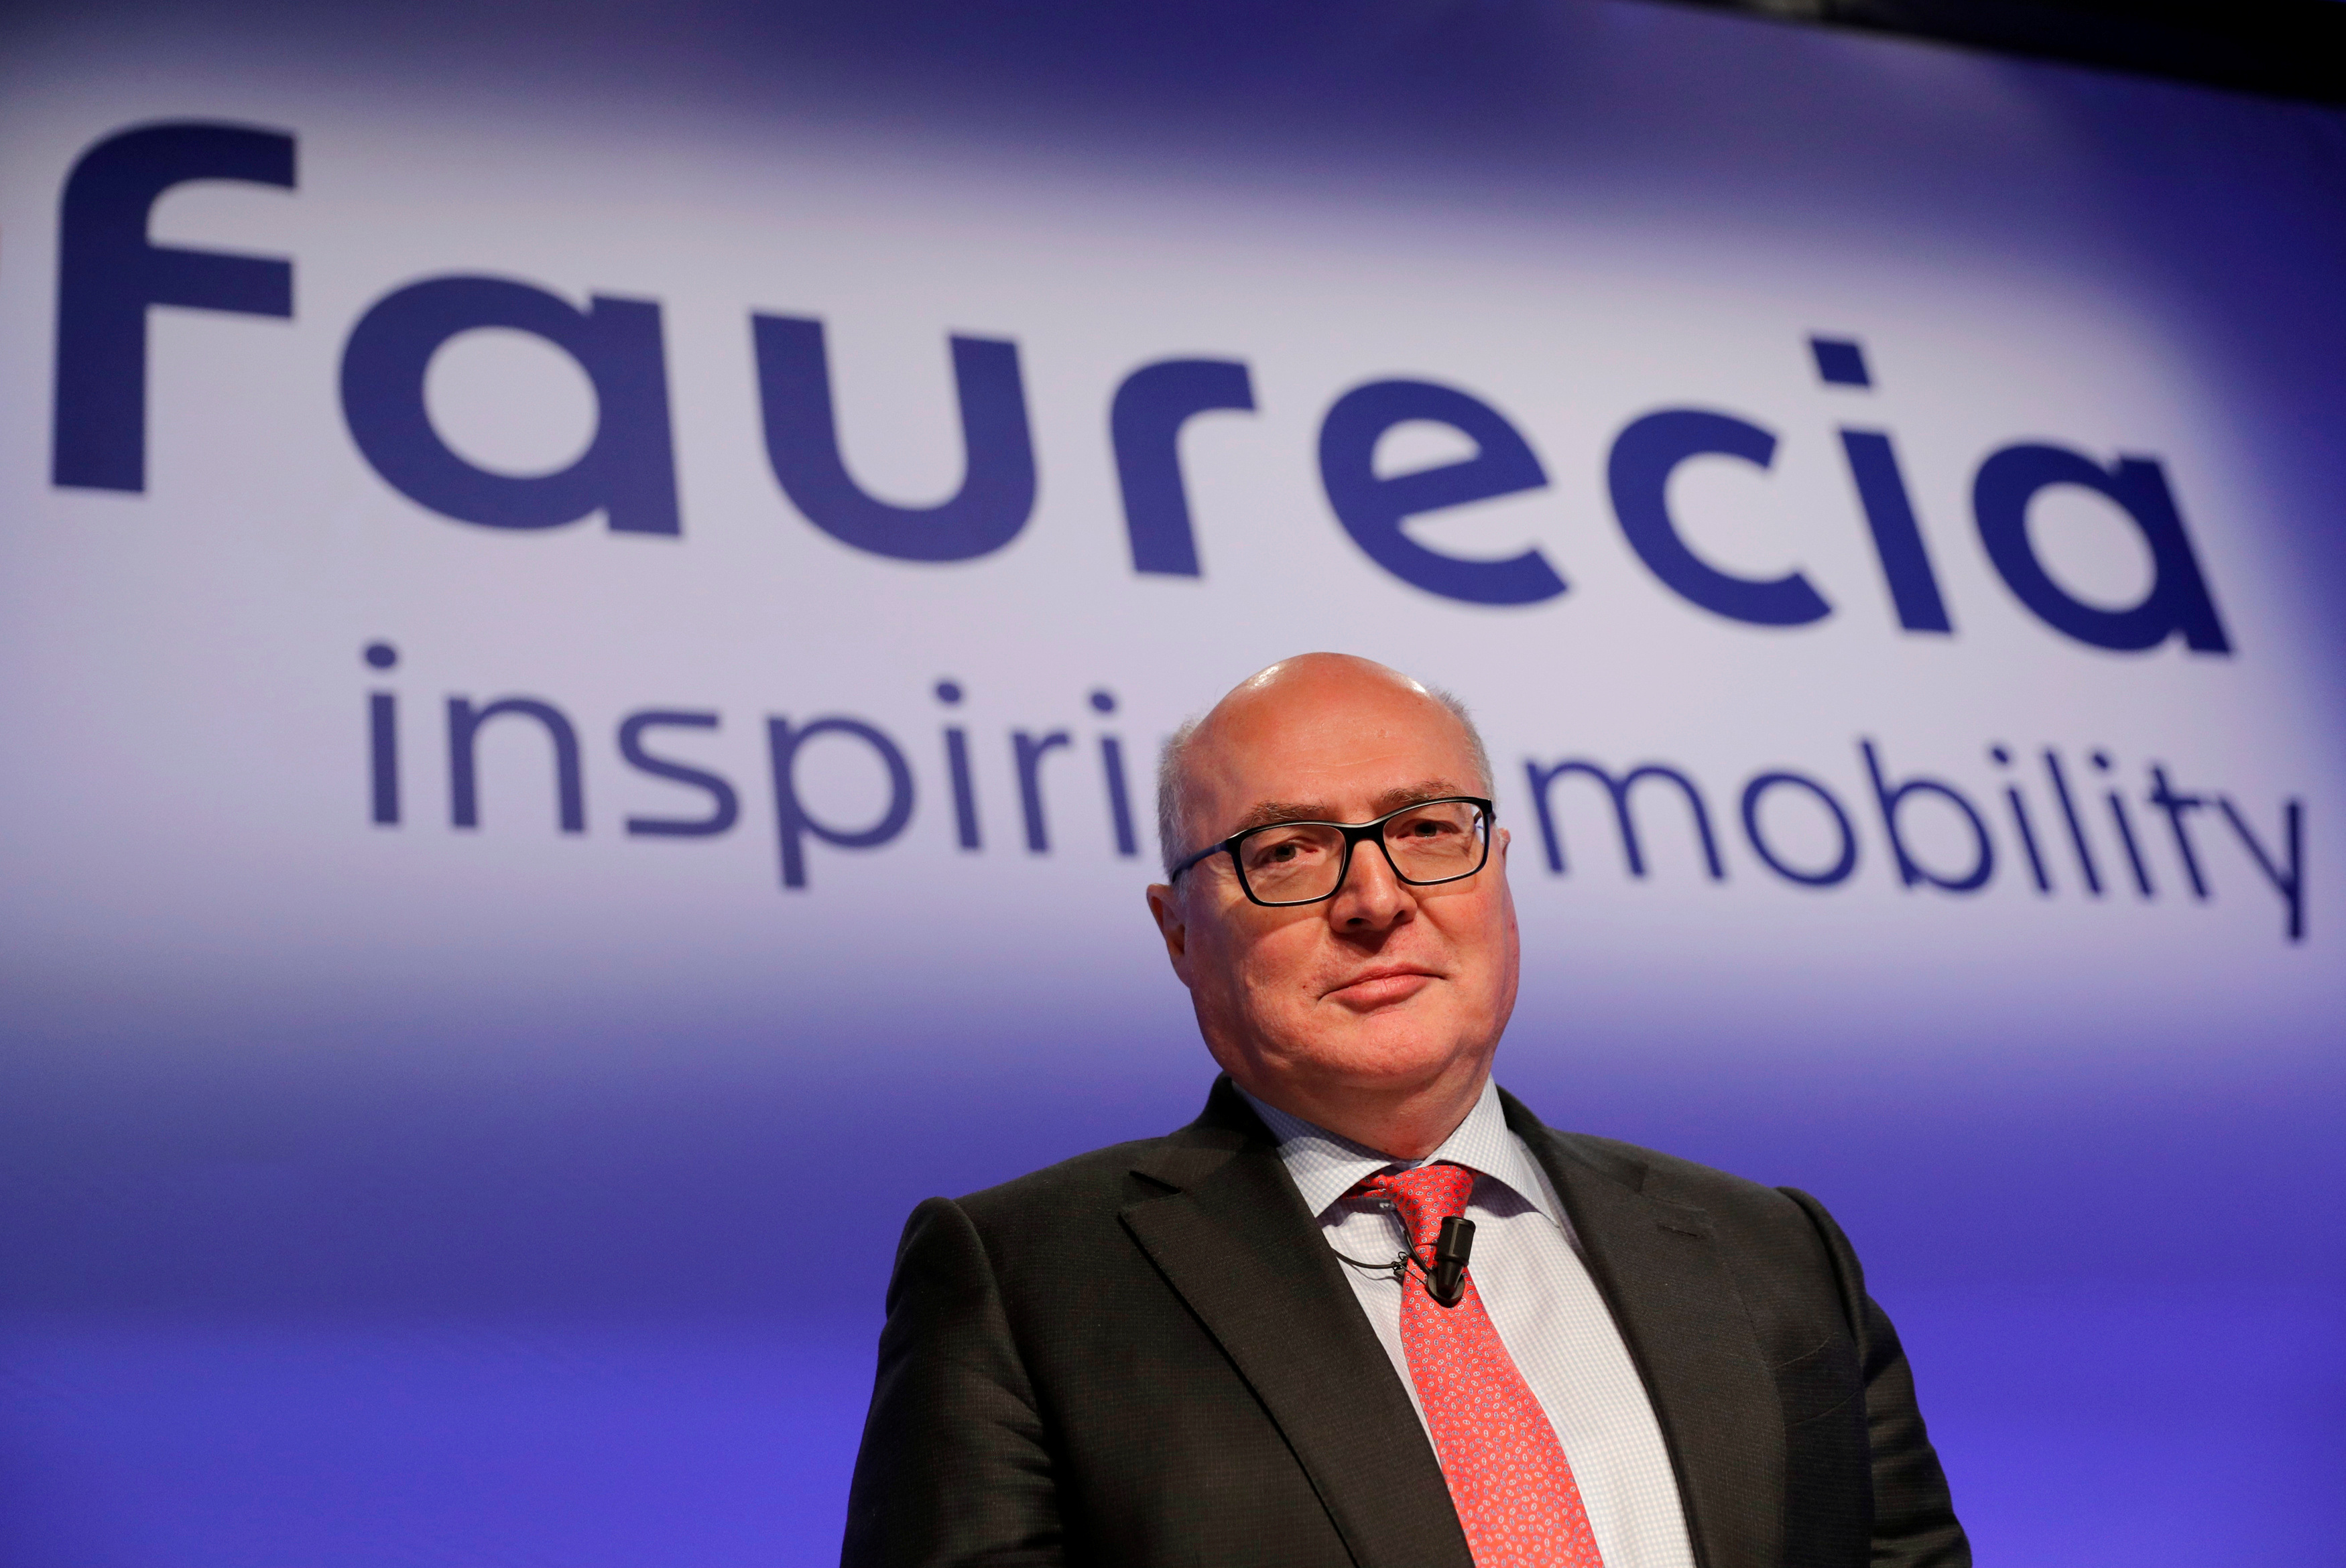 Patrick Koller, CEO of French car parts supplier Faurecia, poses before the company's 2016 annual results presentation in Paris